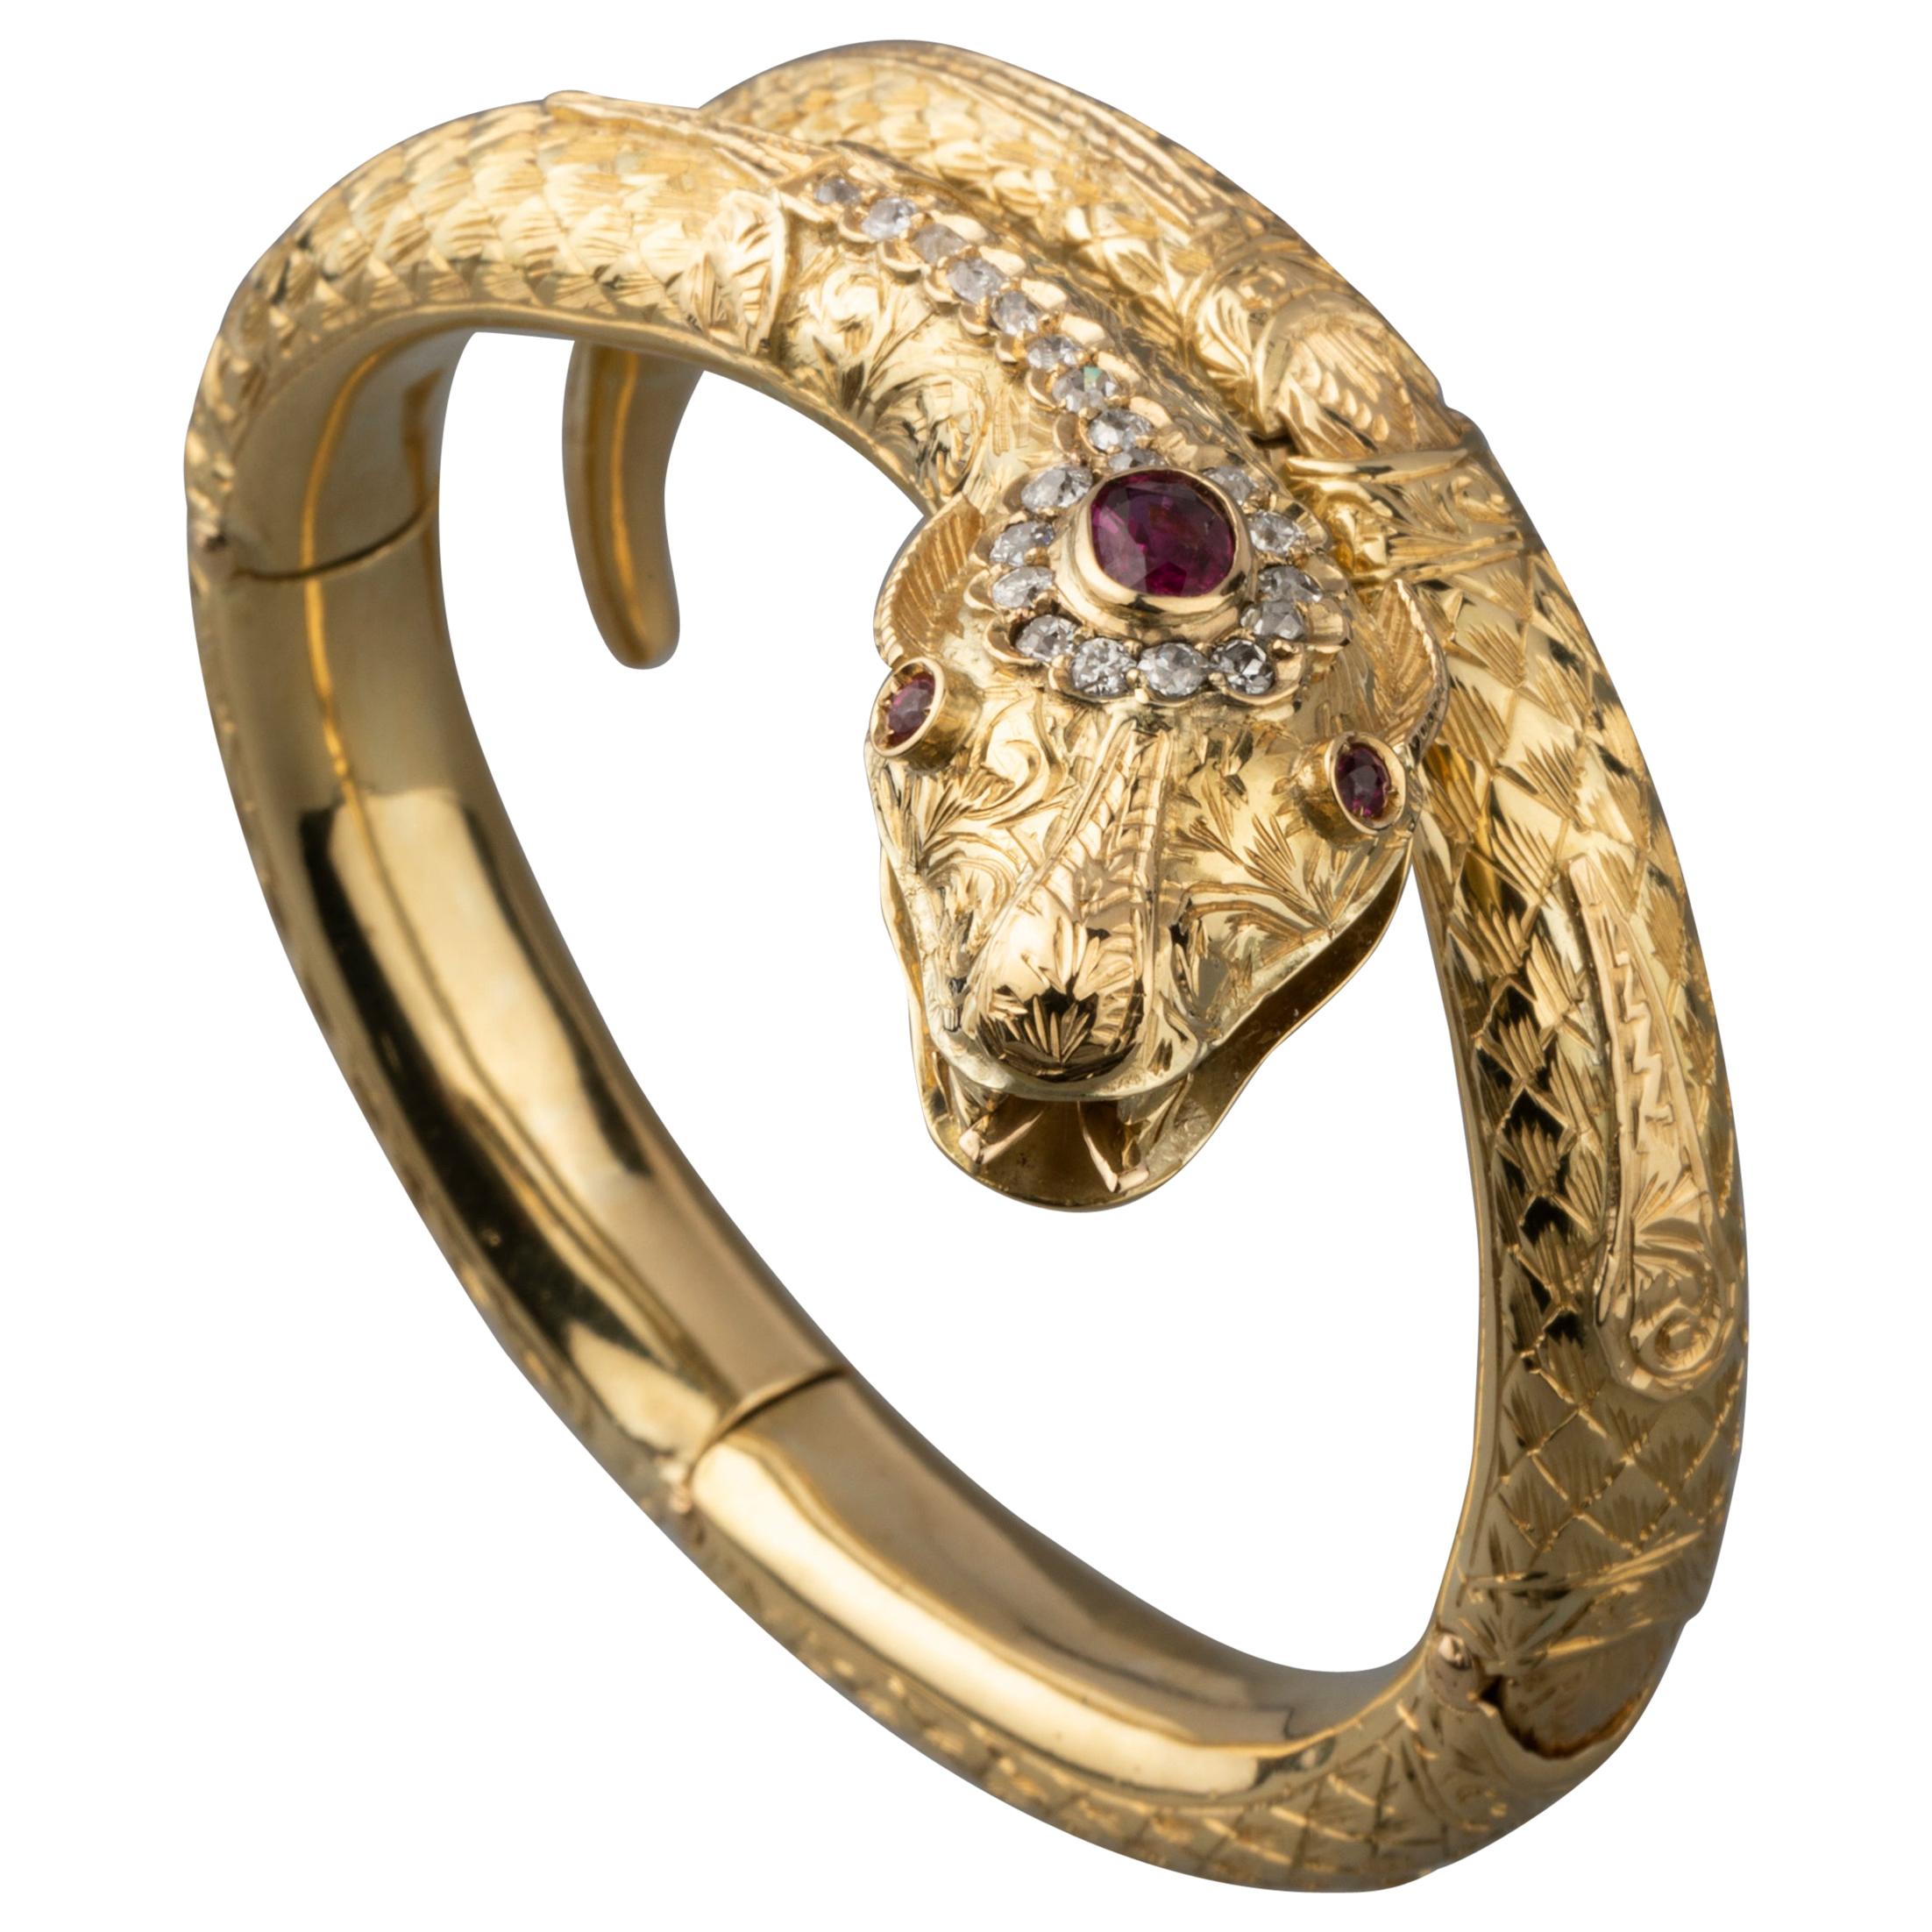 Beautiful vintage Snake bracelet. French made circa 1950.
Made in yellow gold 18k, set with diamonds (1 carat estimate total).
The principal ruby weights 1 carat estimate.
Inside diameter is6 * 5 cm, it is average size.
The width is 9mm, it has